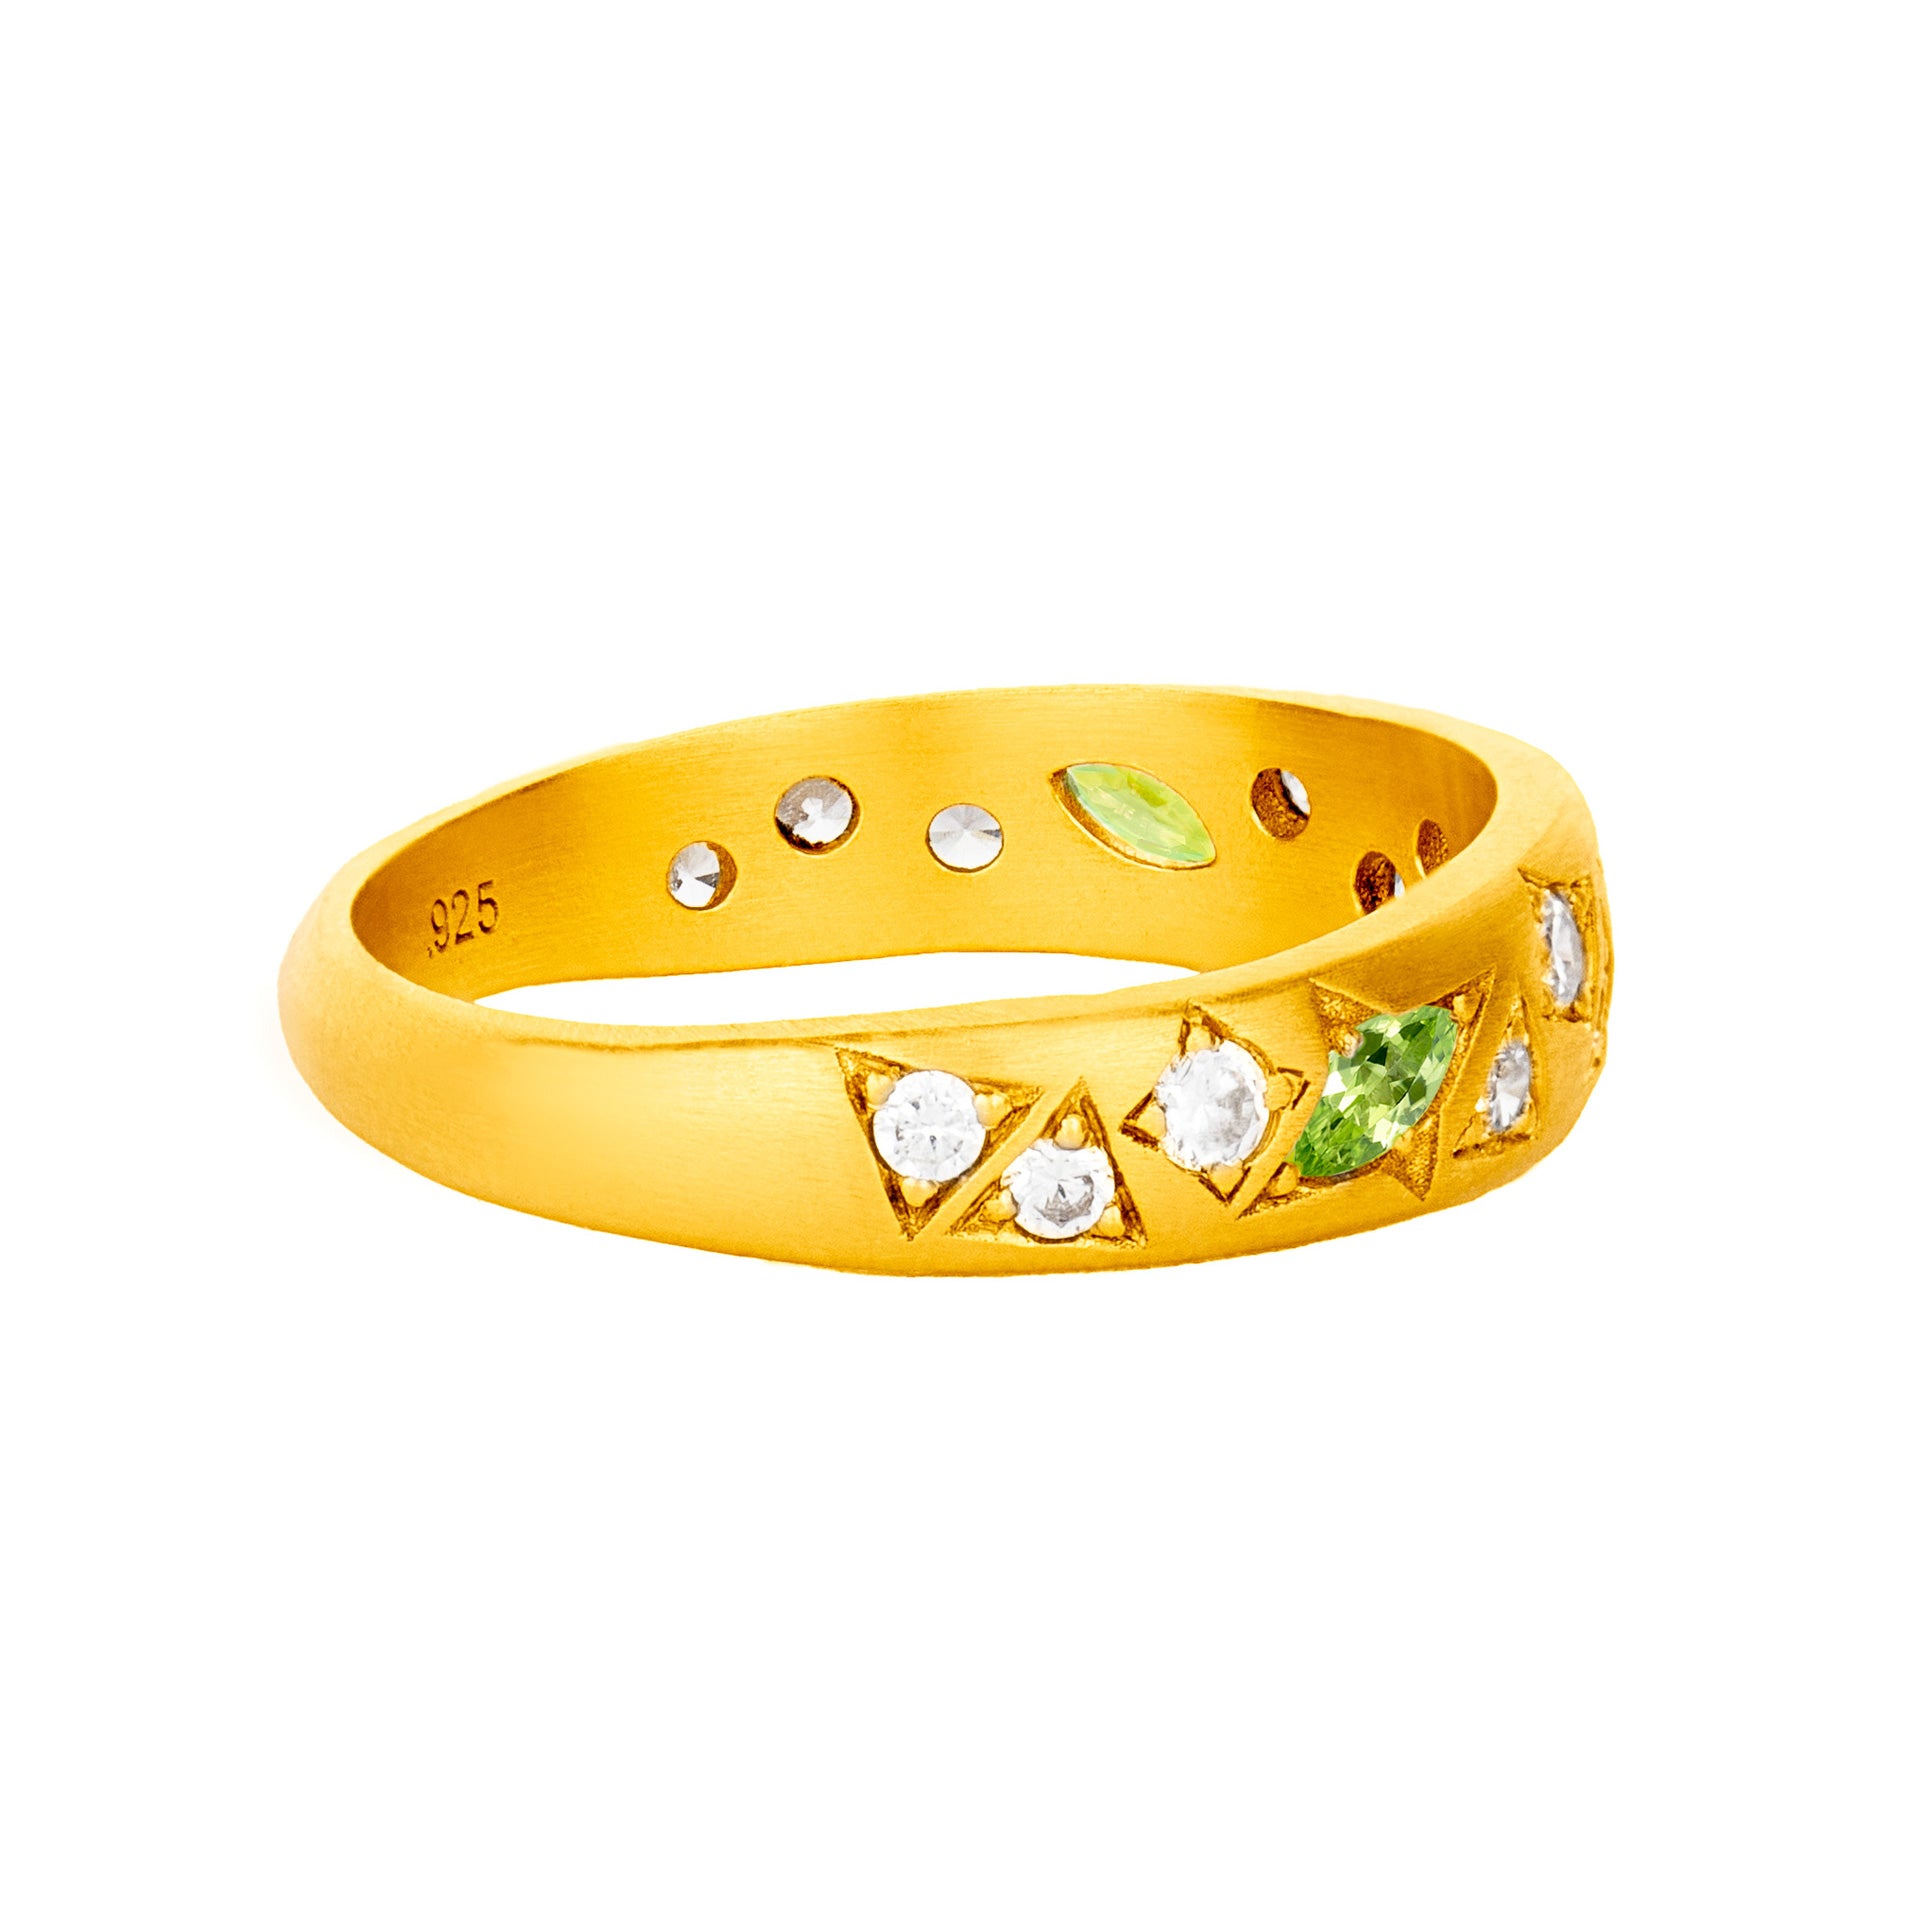 The August Birthstone Ring